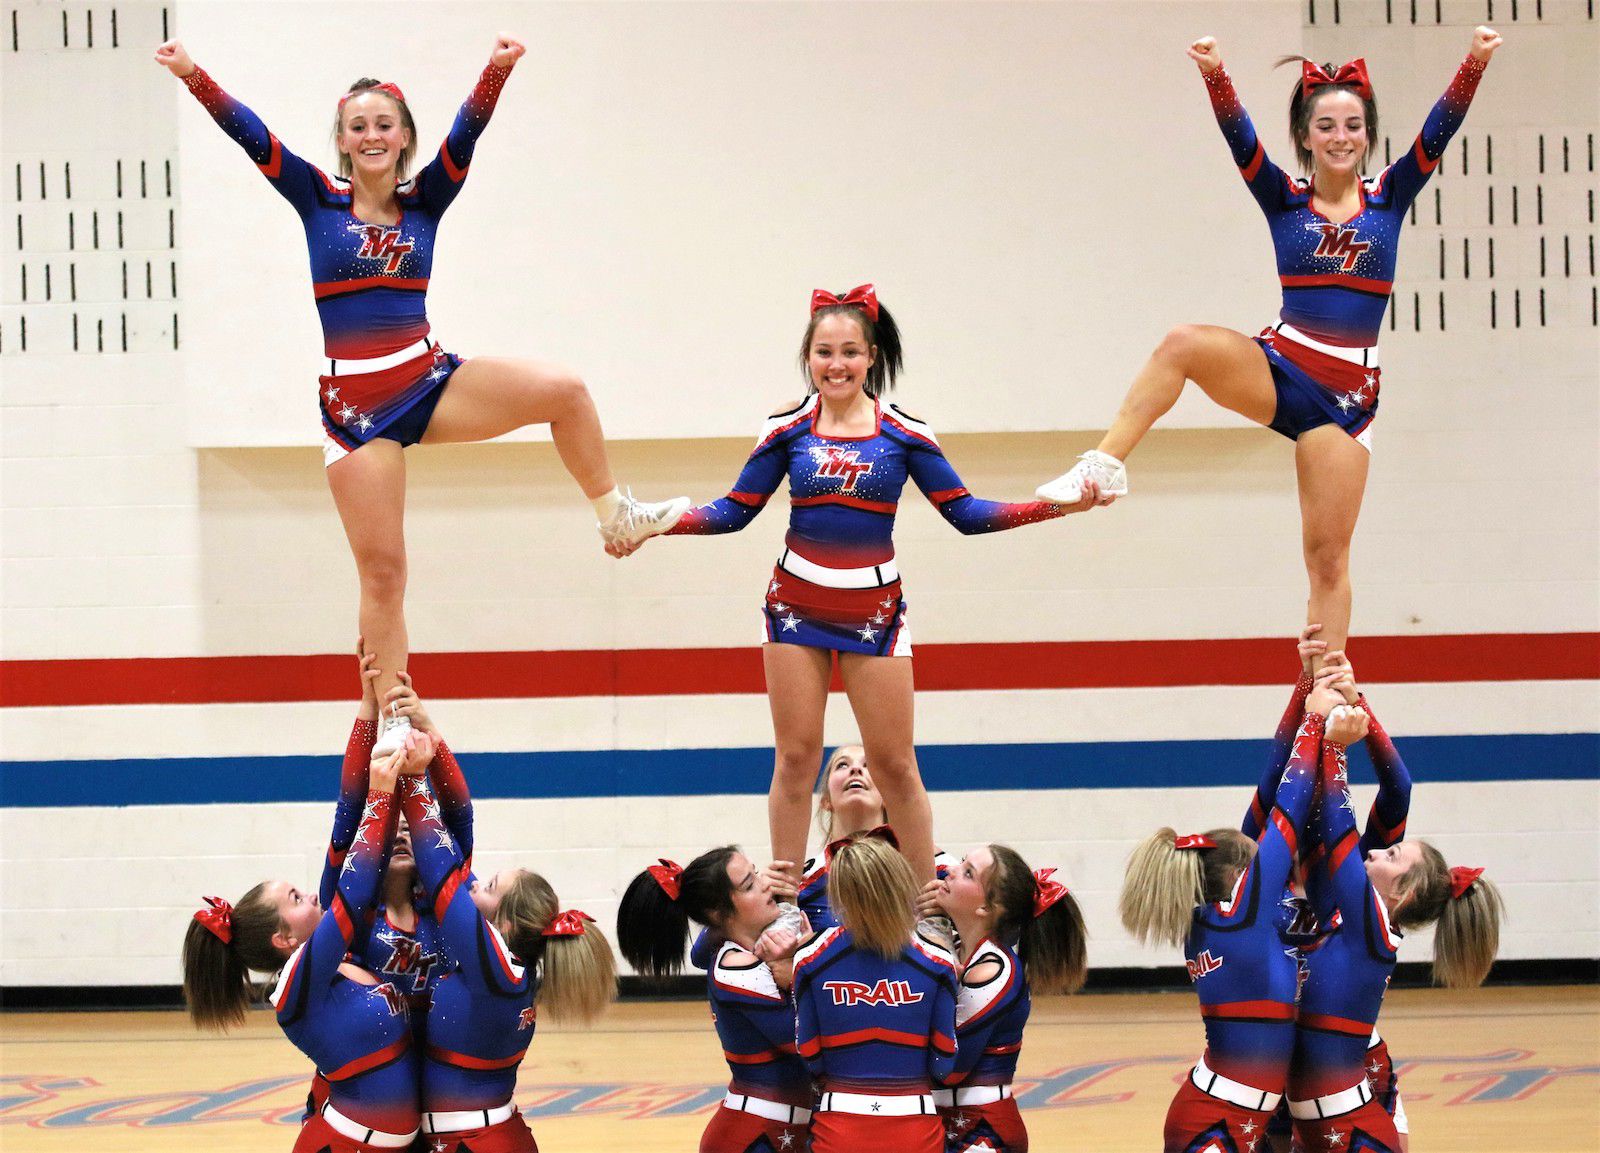 What the Stunt Positions in Cheerleading Are (+ 4 Common Misconceptions)